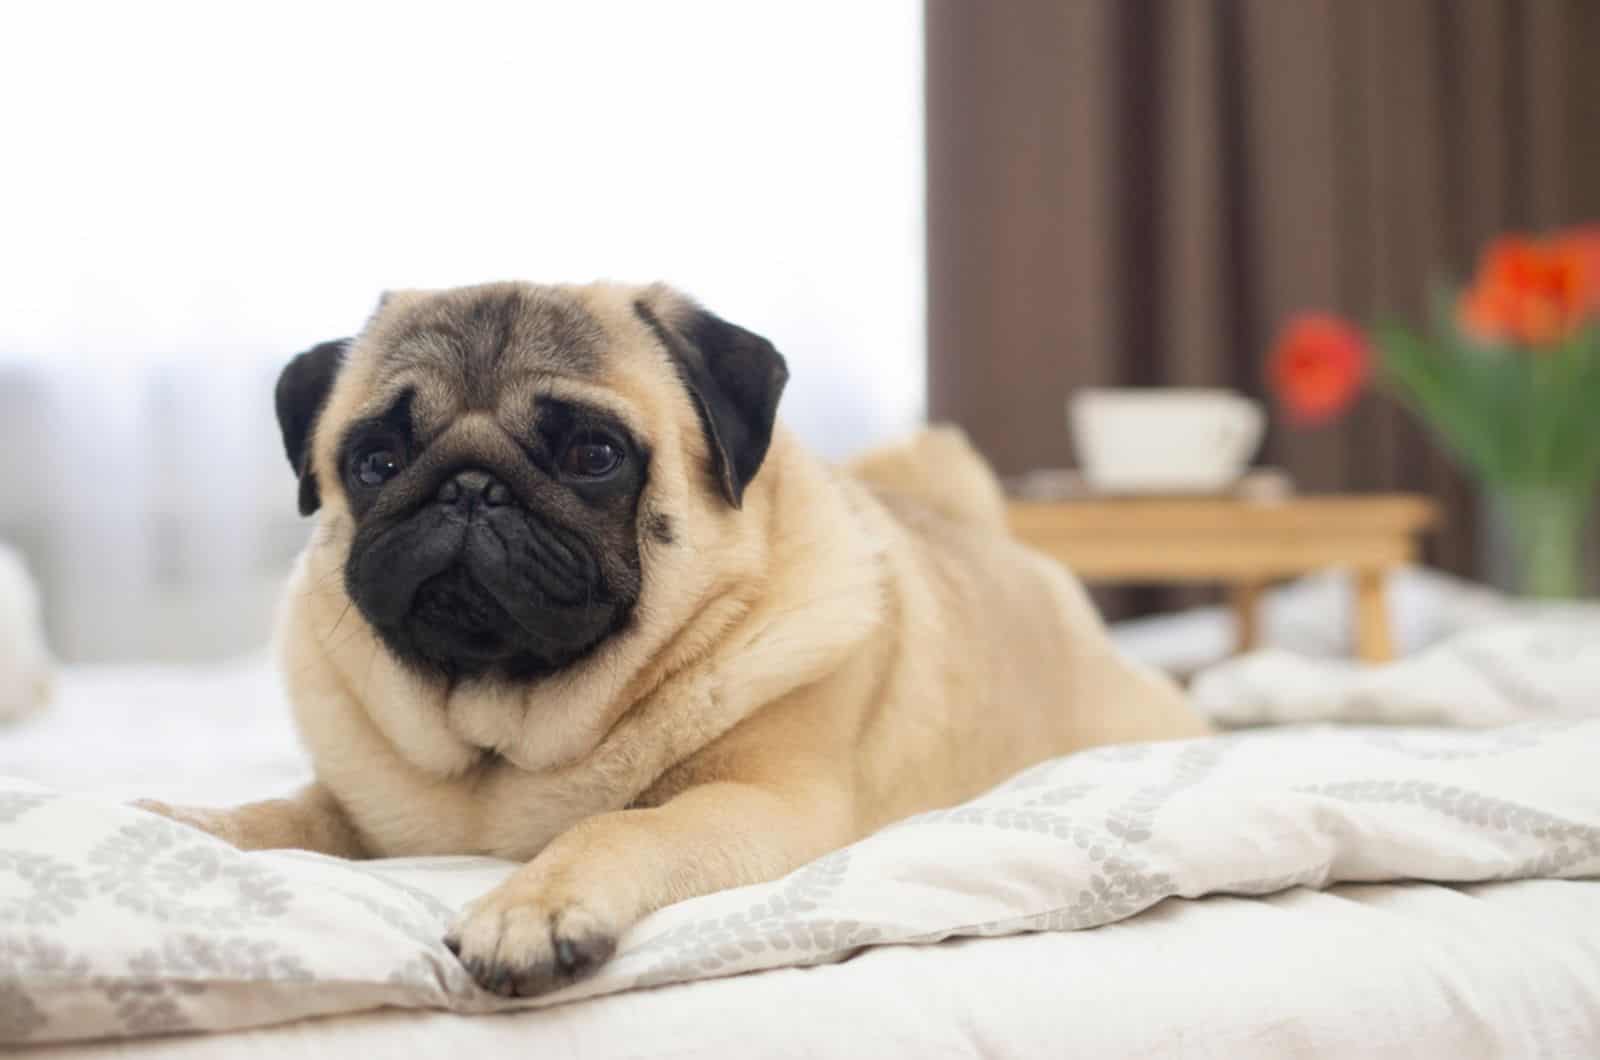 pug dog lying on the bed in the apartment